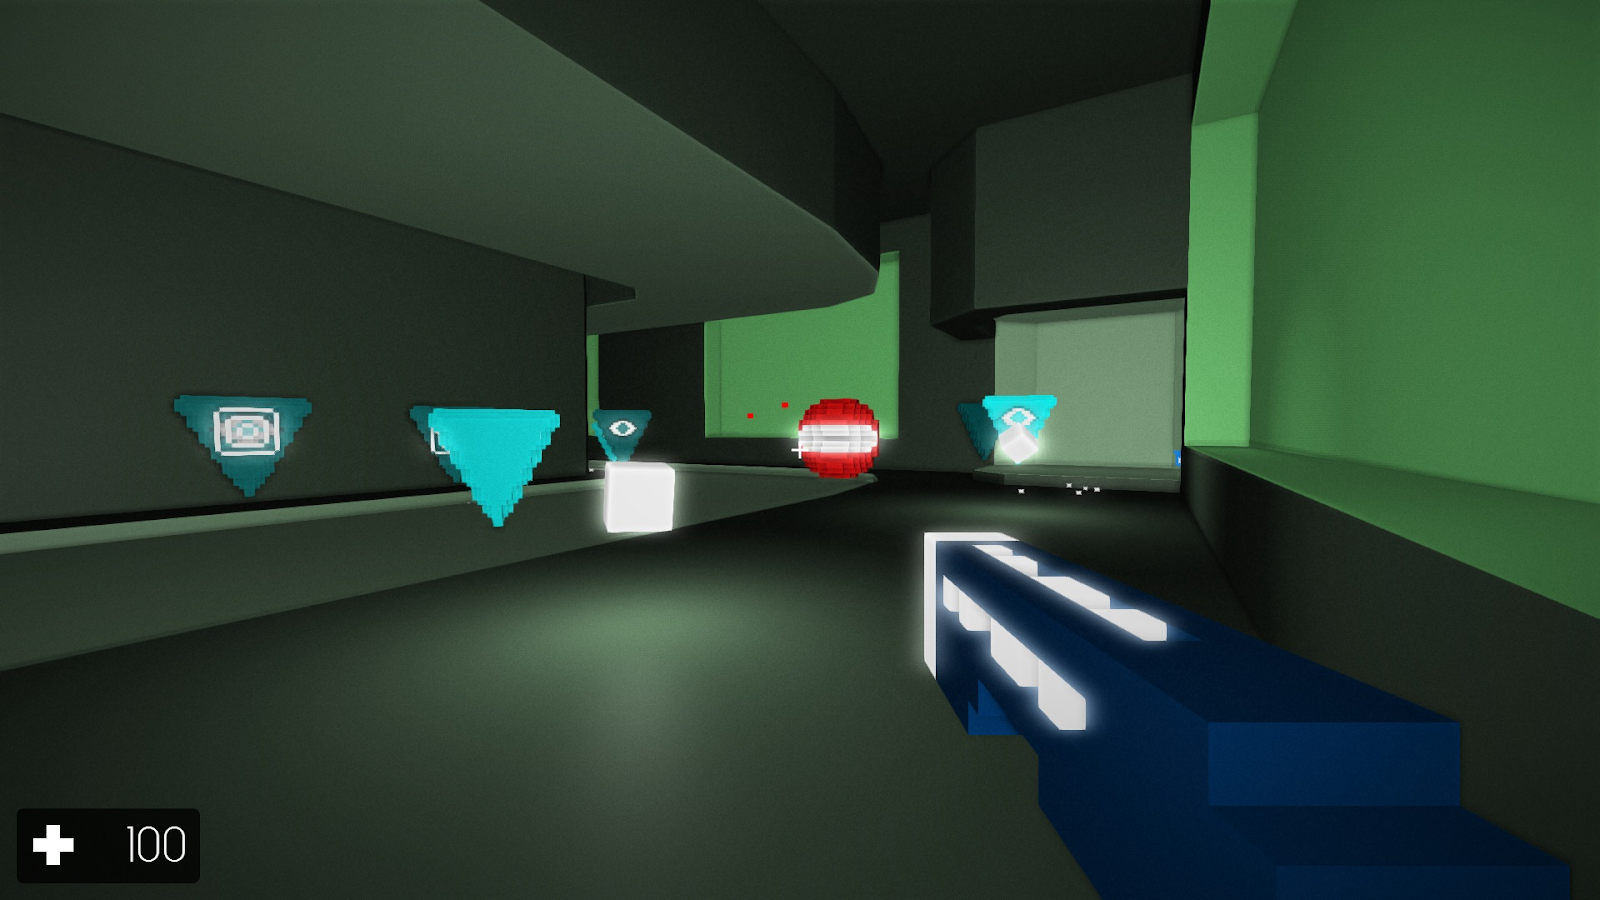 Gorescript Classic is a fast-paced '90s-style first-person shooter bui...